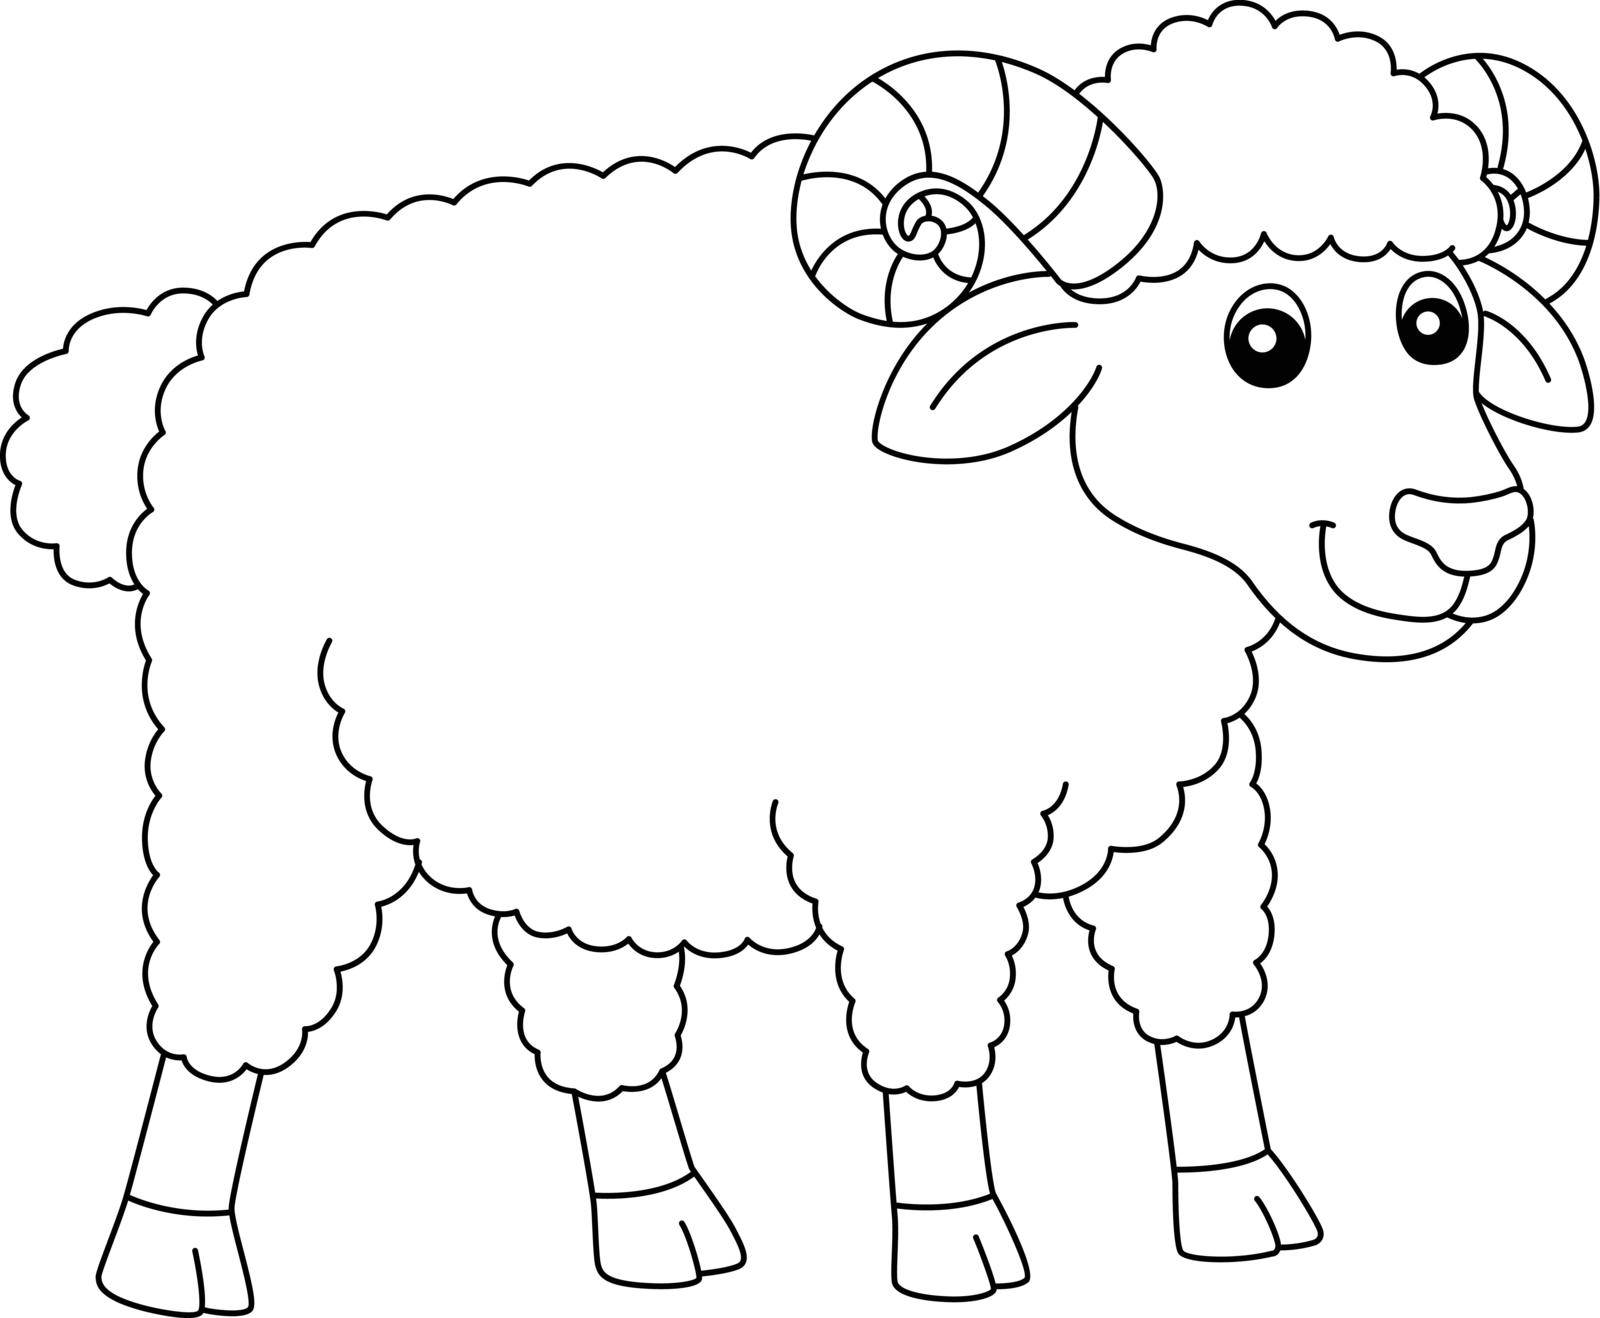 Sheep Coloring Page Isolated for Kids by abbydesign